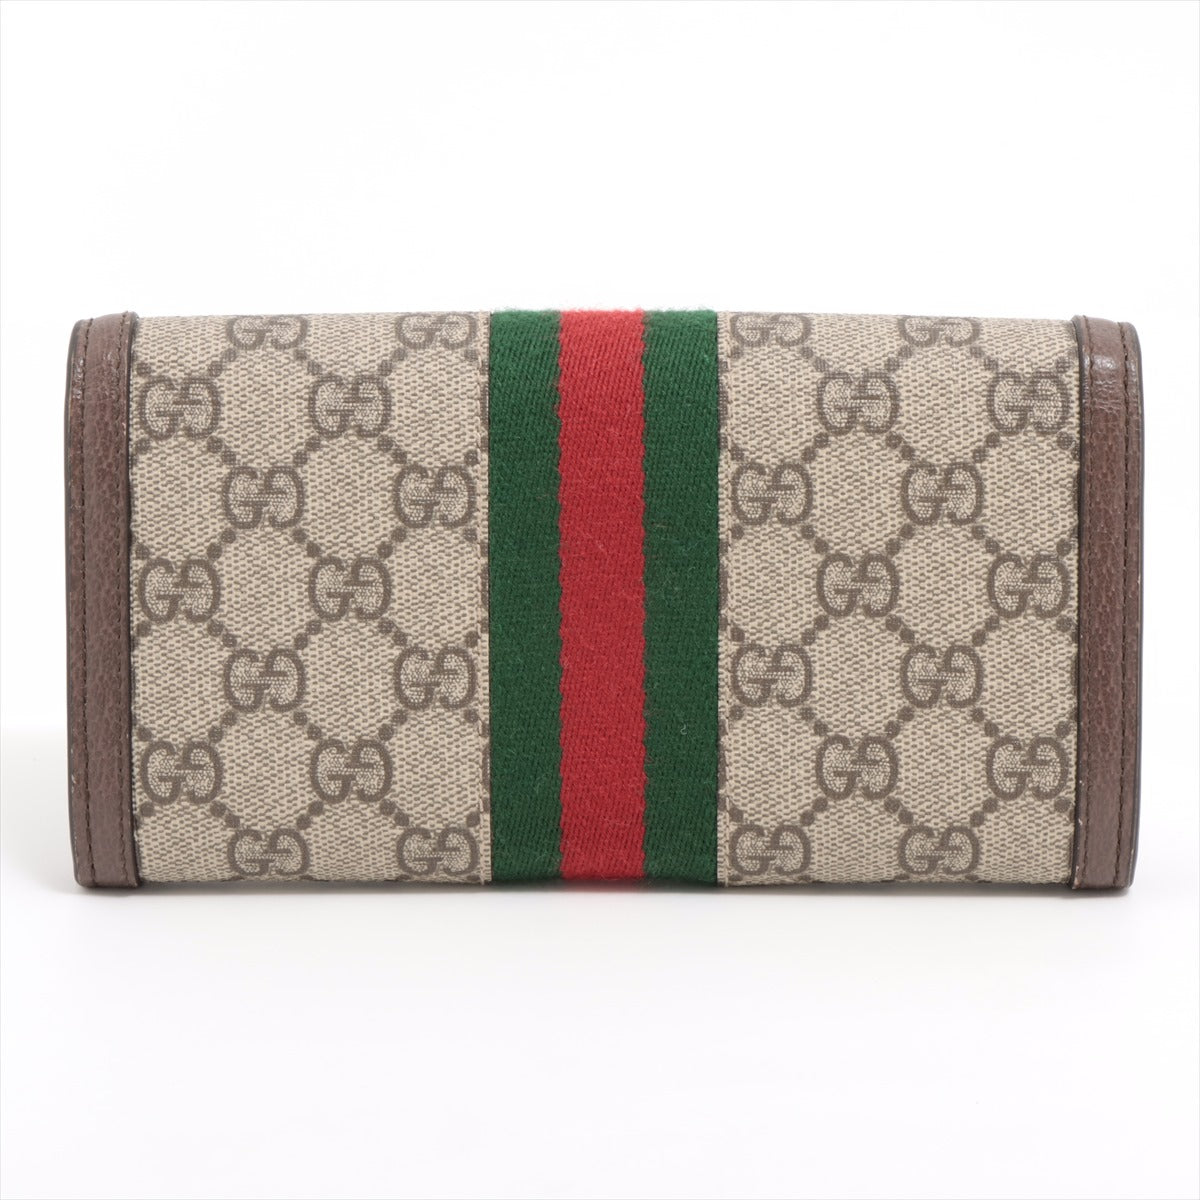 Gucci GG Marmont 523153 PVC & leather Wallet Brown